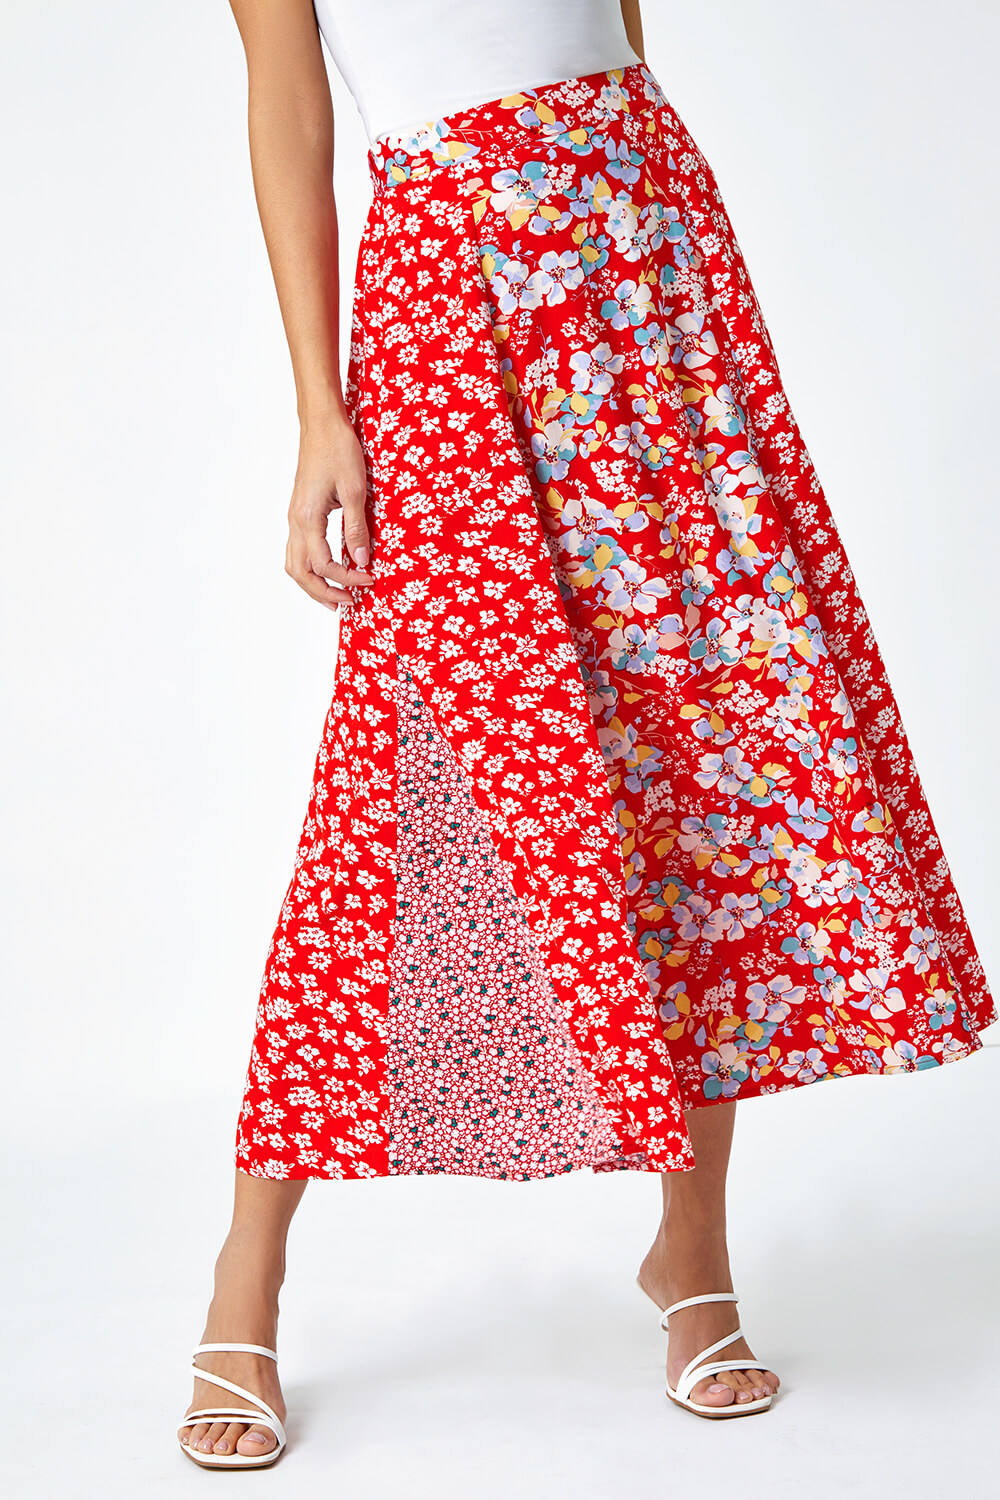 Red Ditsy Floral Print Midi Skirt, Image 4 of 5